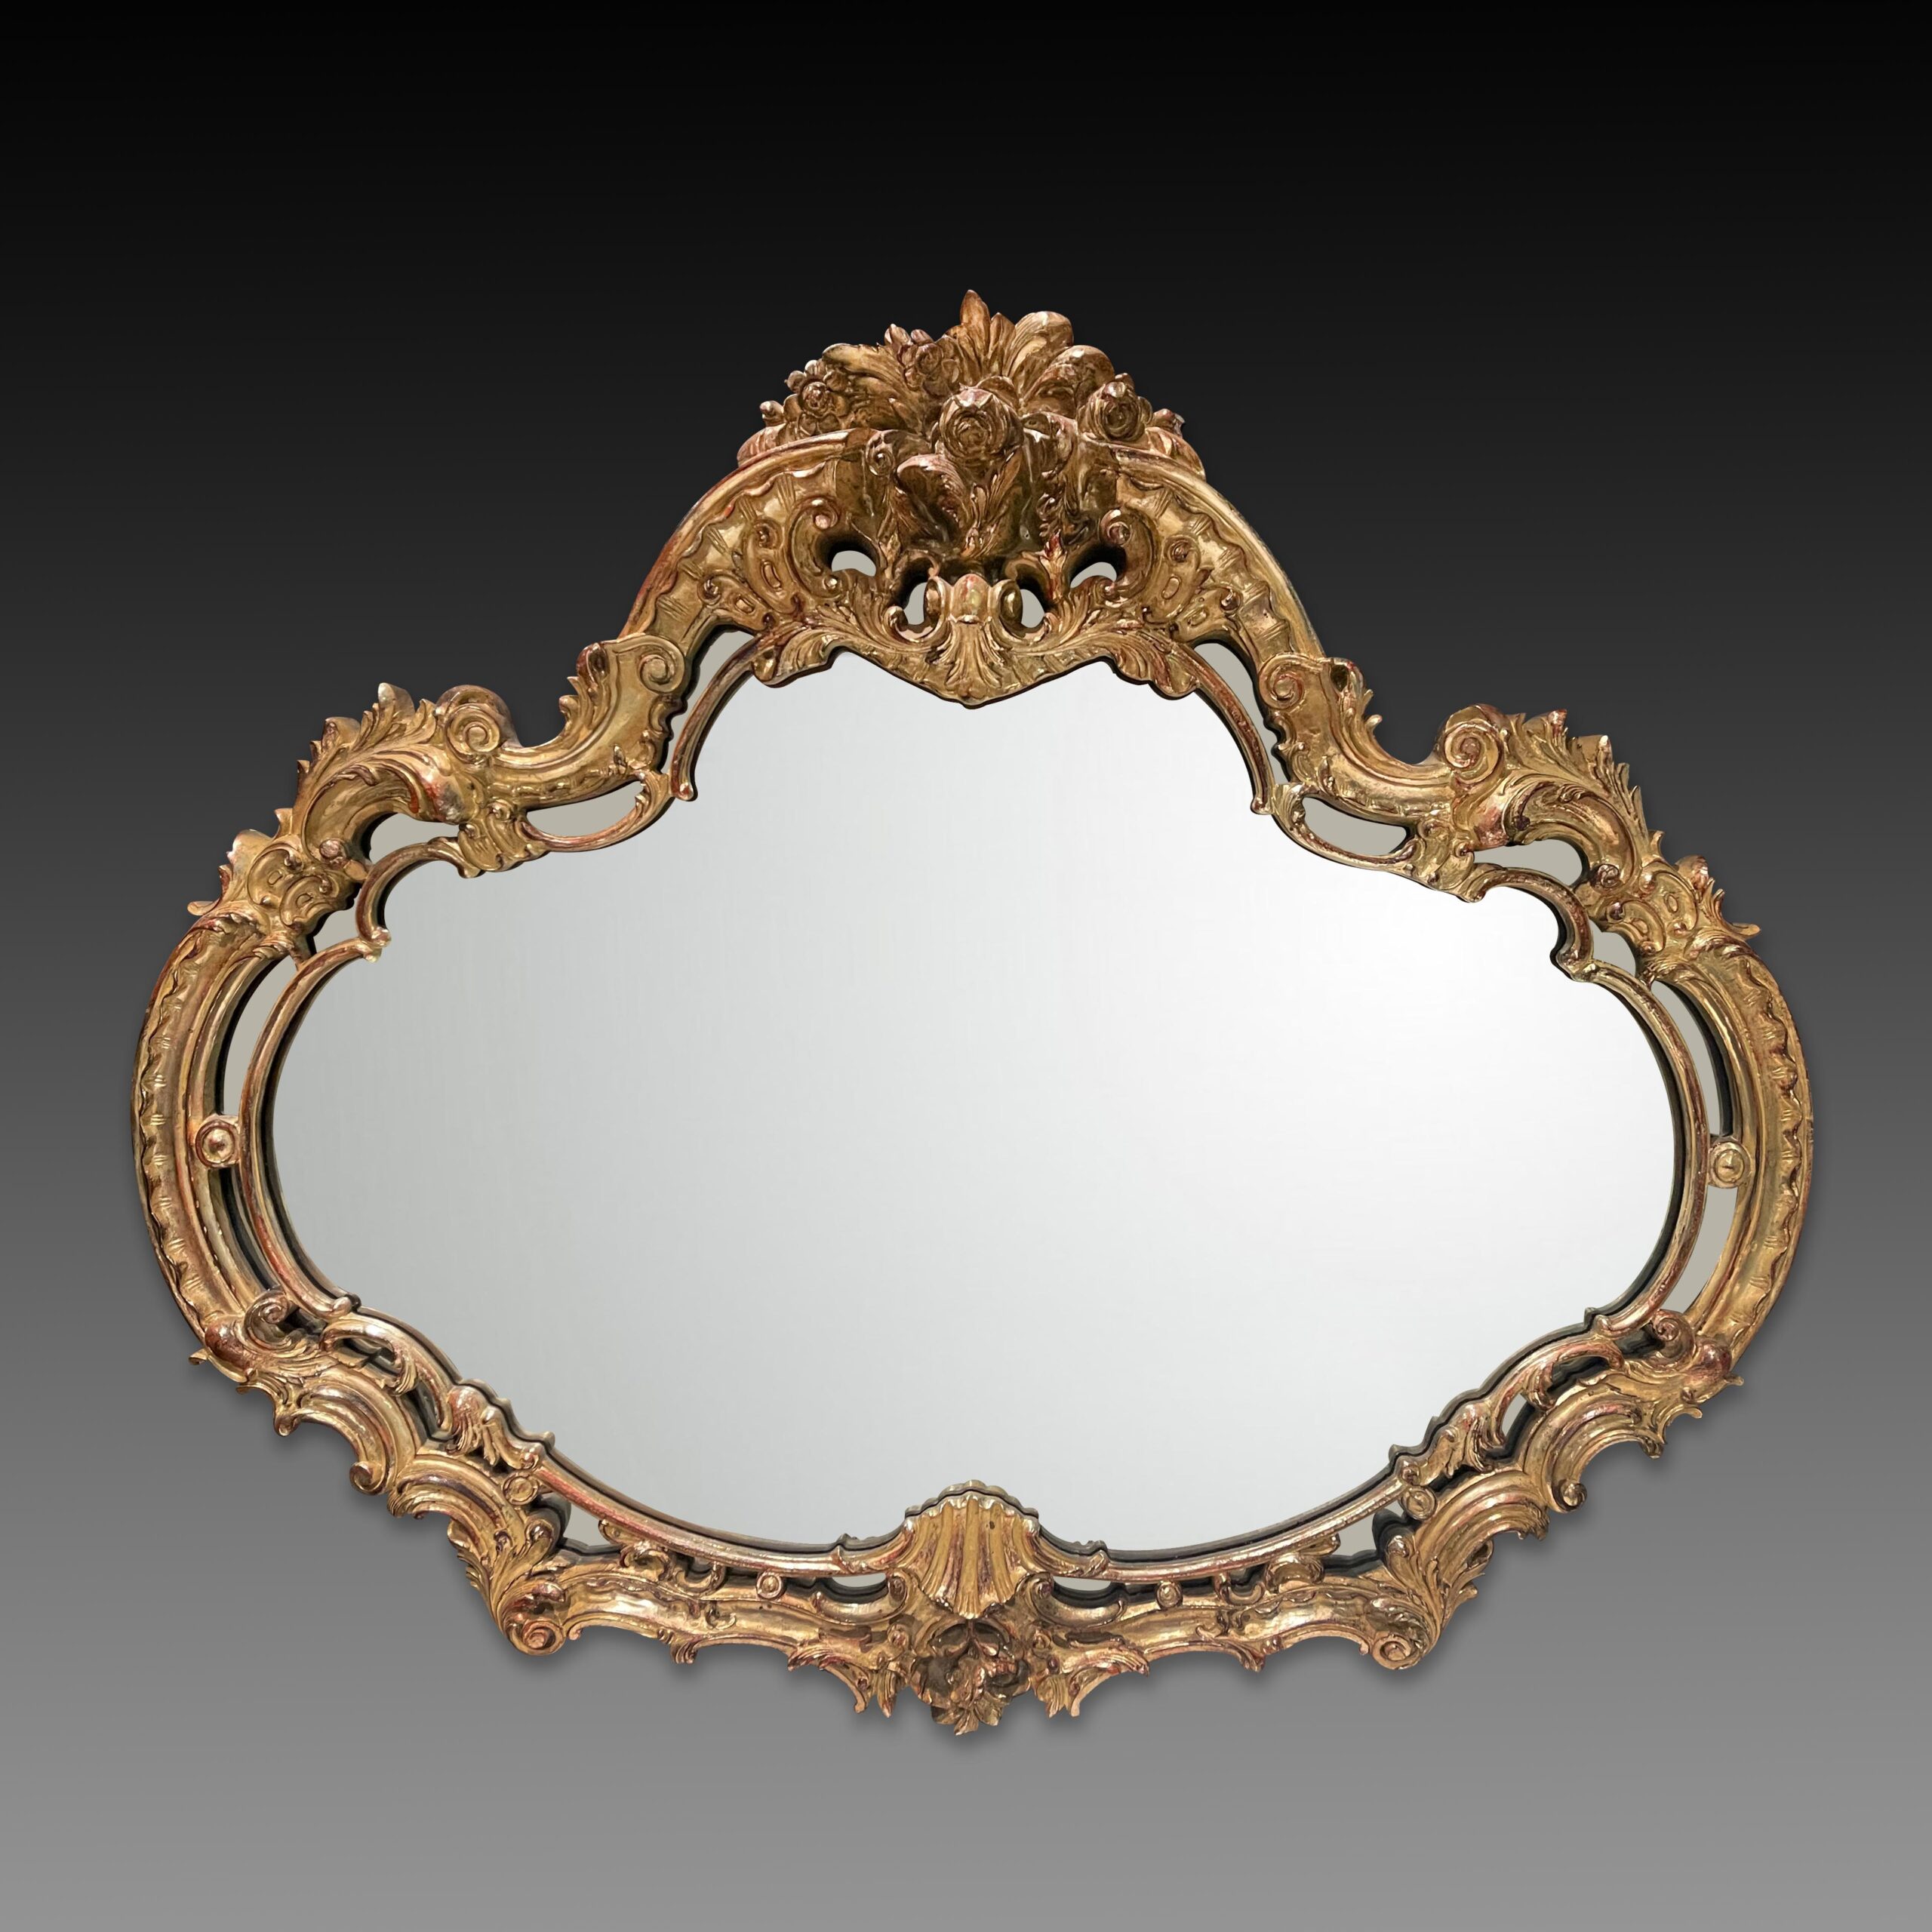 Large Rococo Style Carved Gold Gilt Mirror 19th century大型洛可可